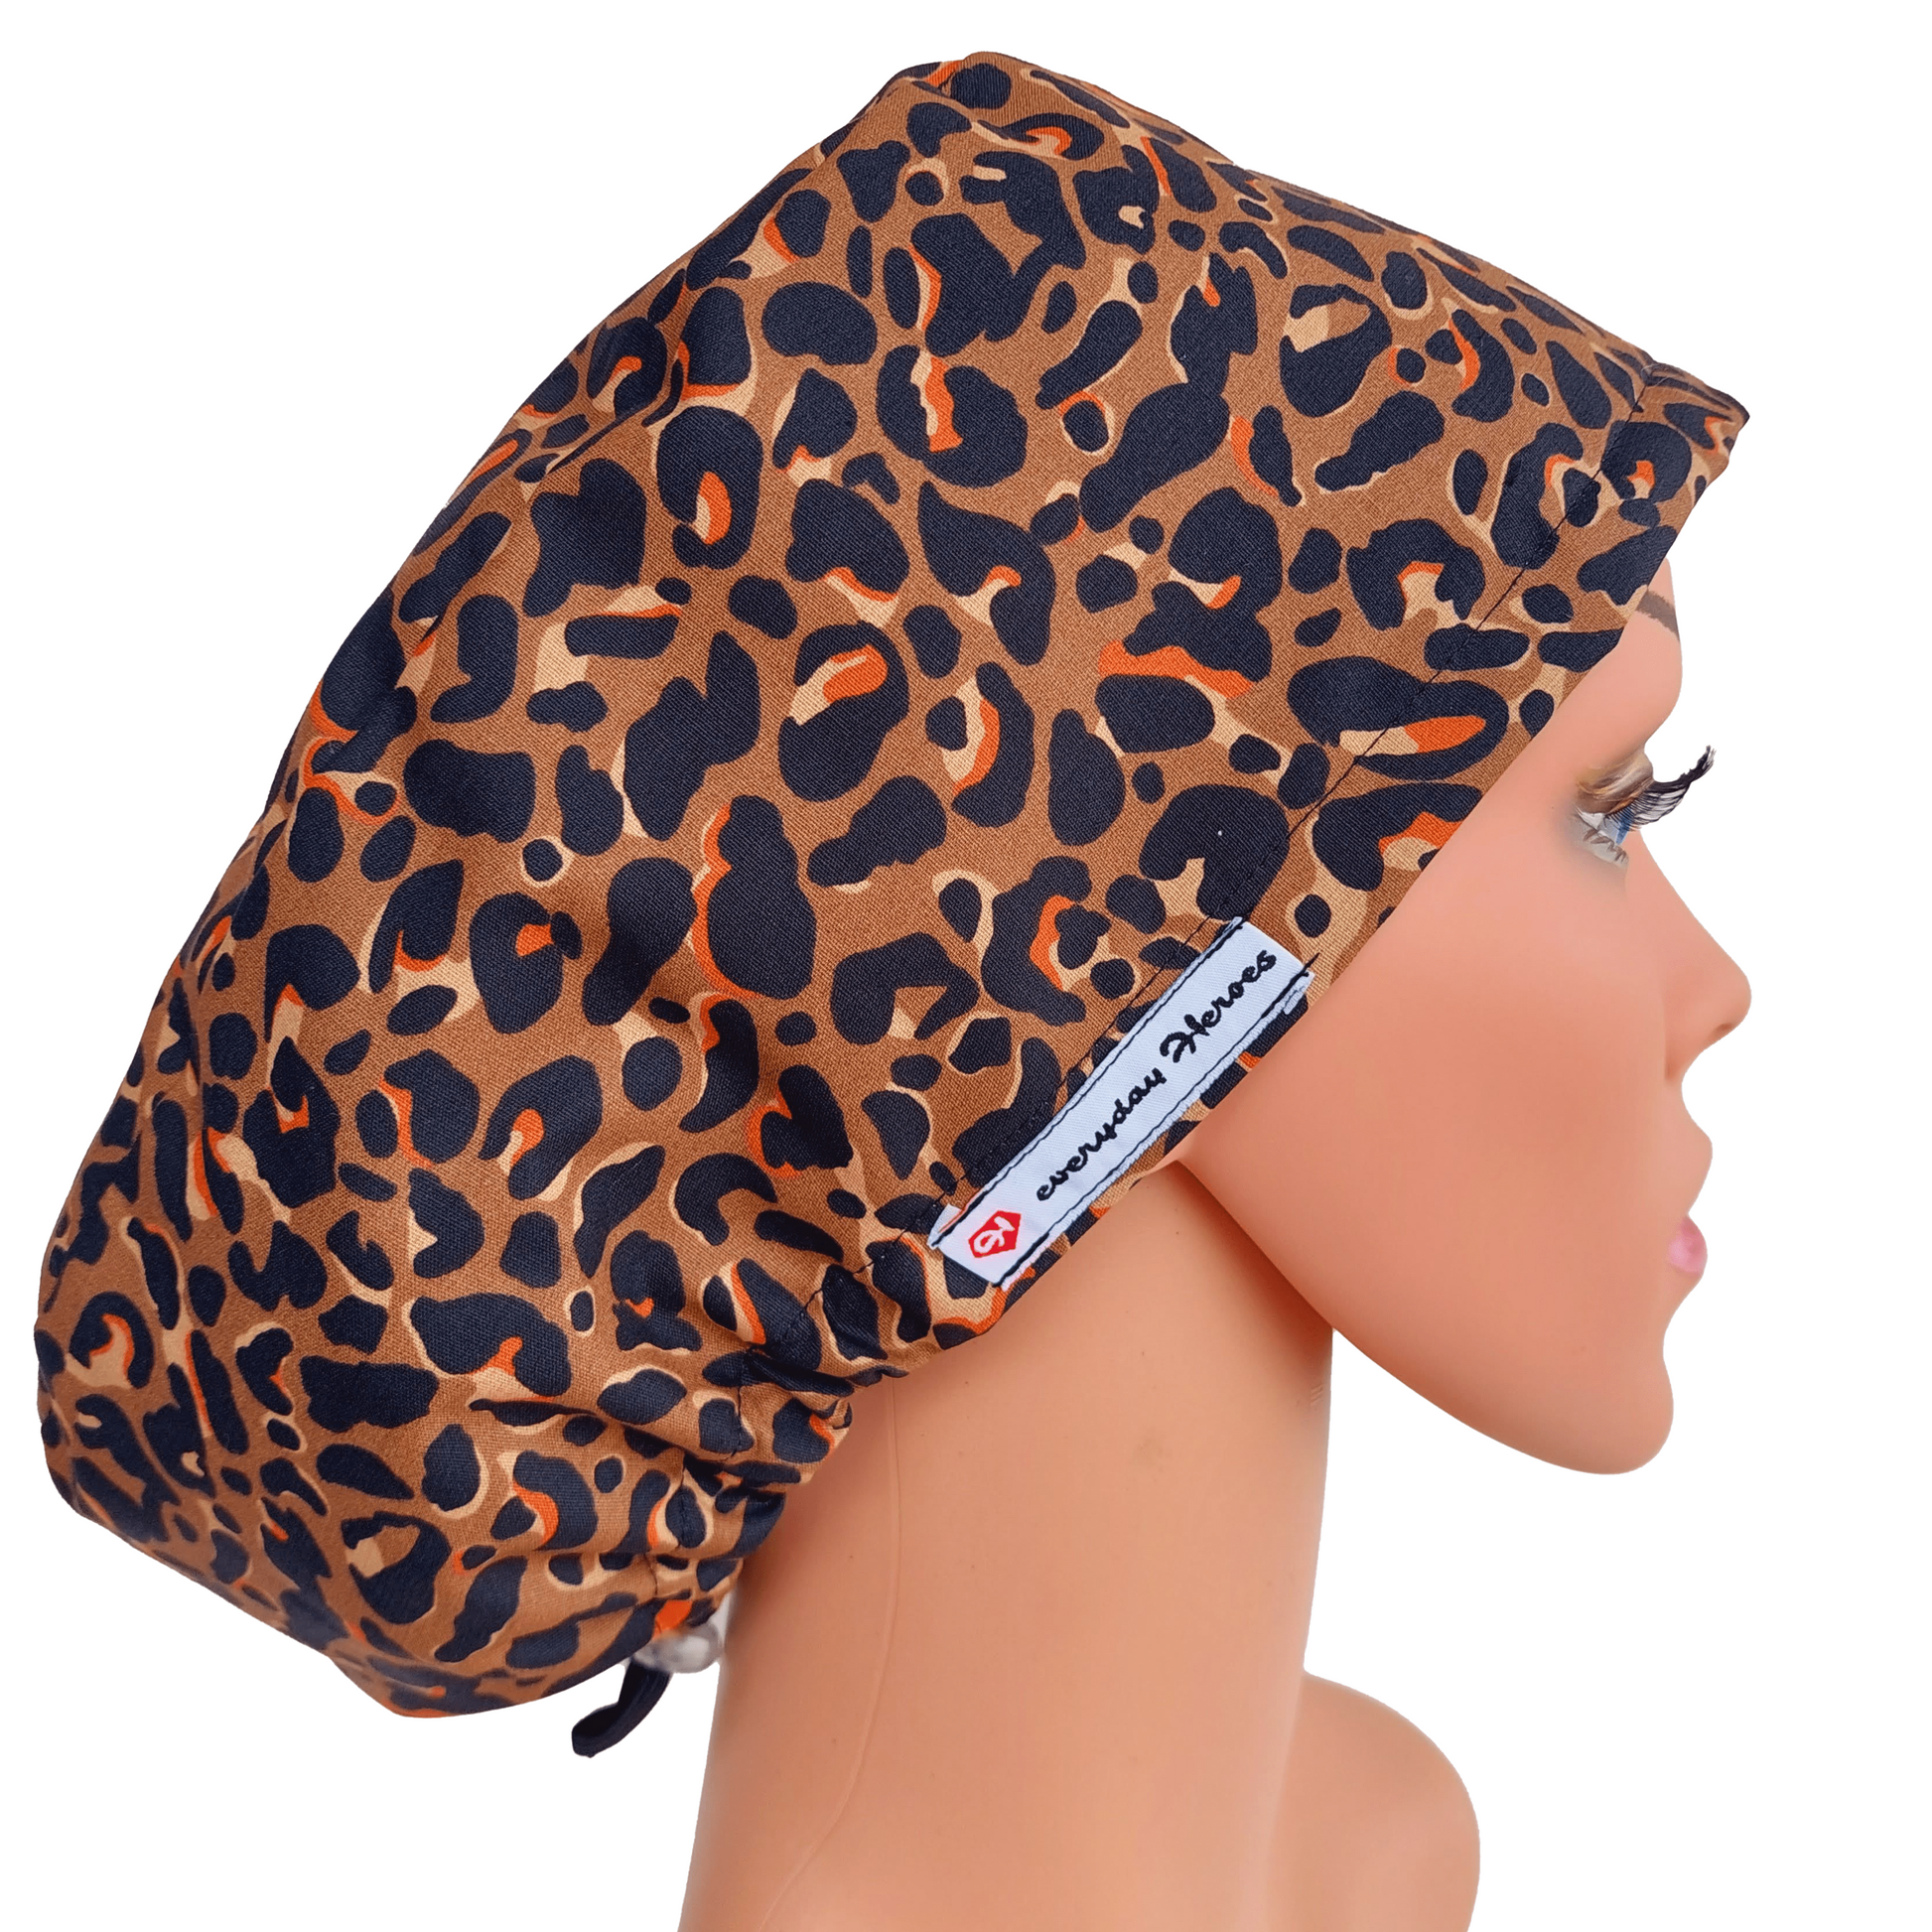 Leopard Print Scrub Cap For Nurse - Surgical Cap For Woman - Adjustable with Satin Lined and Buttons.